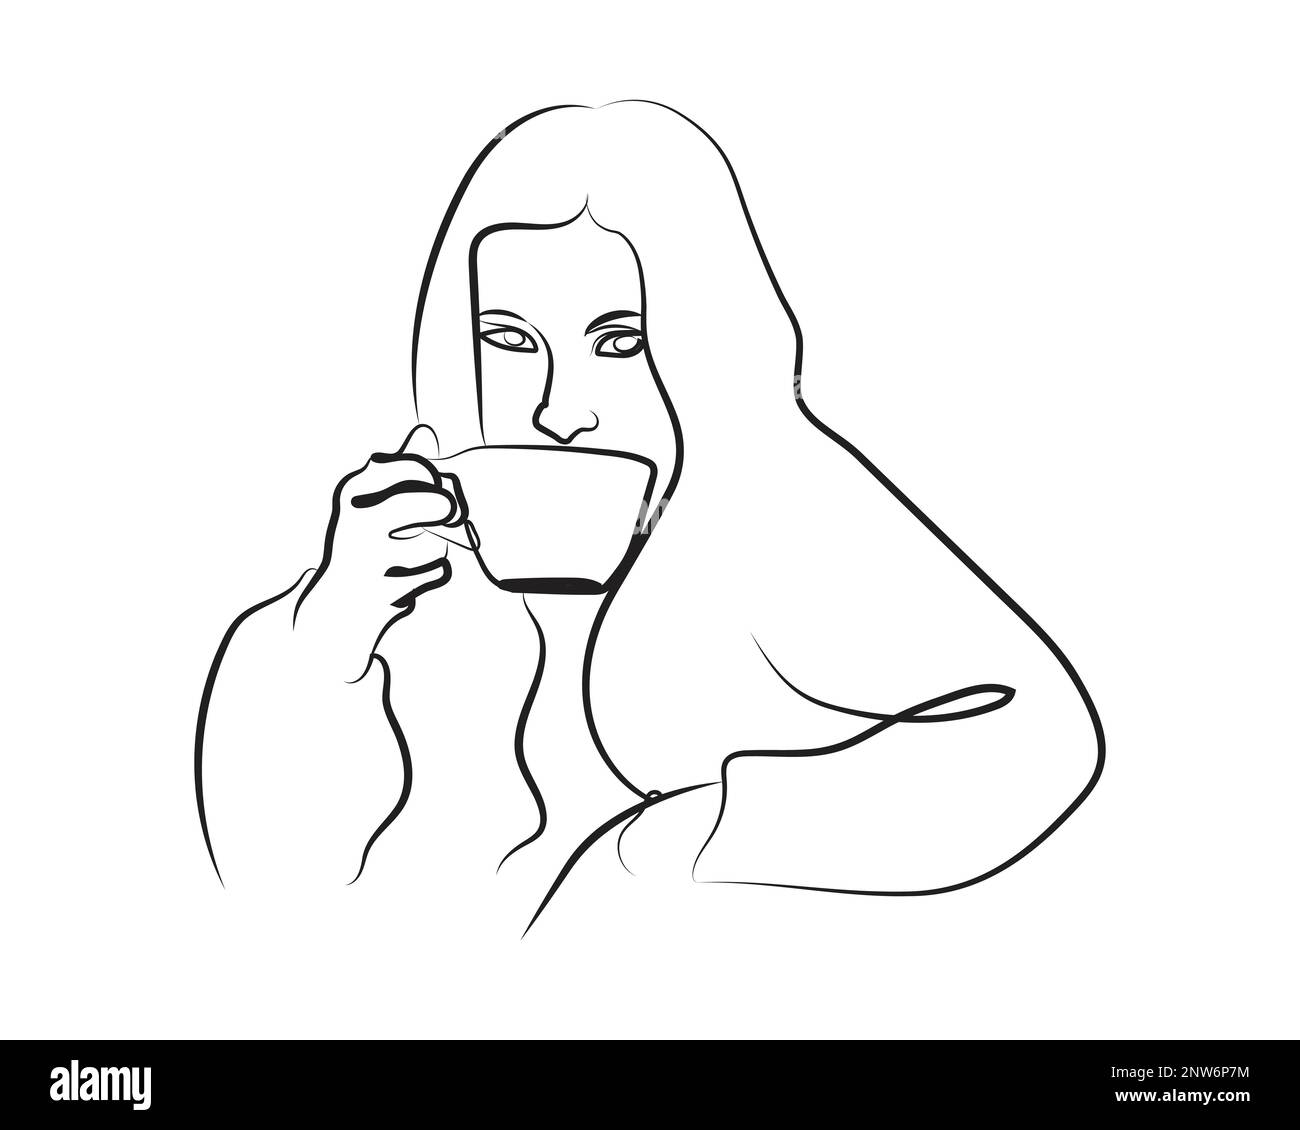 Woman Enjoying Drinking Coffee Gracefully Illustration with Silhouette Line Art Style Stock Vector